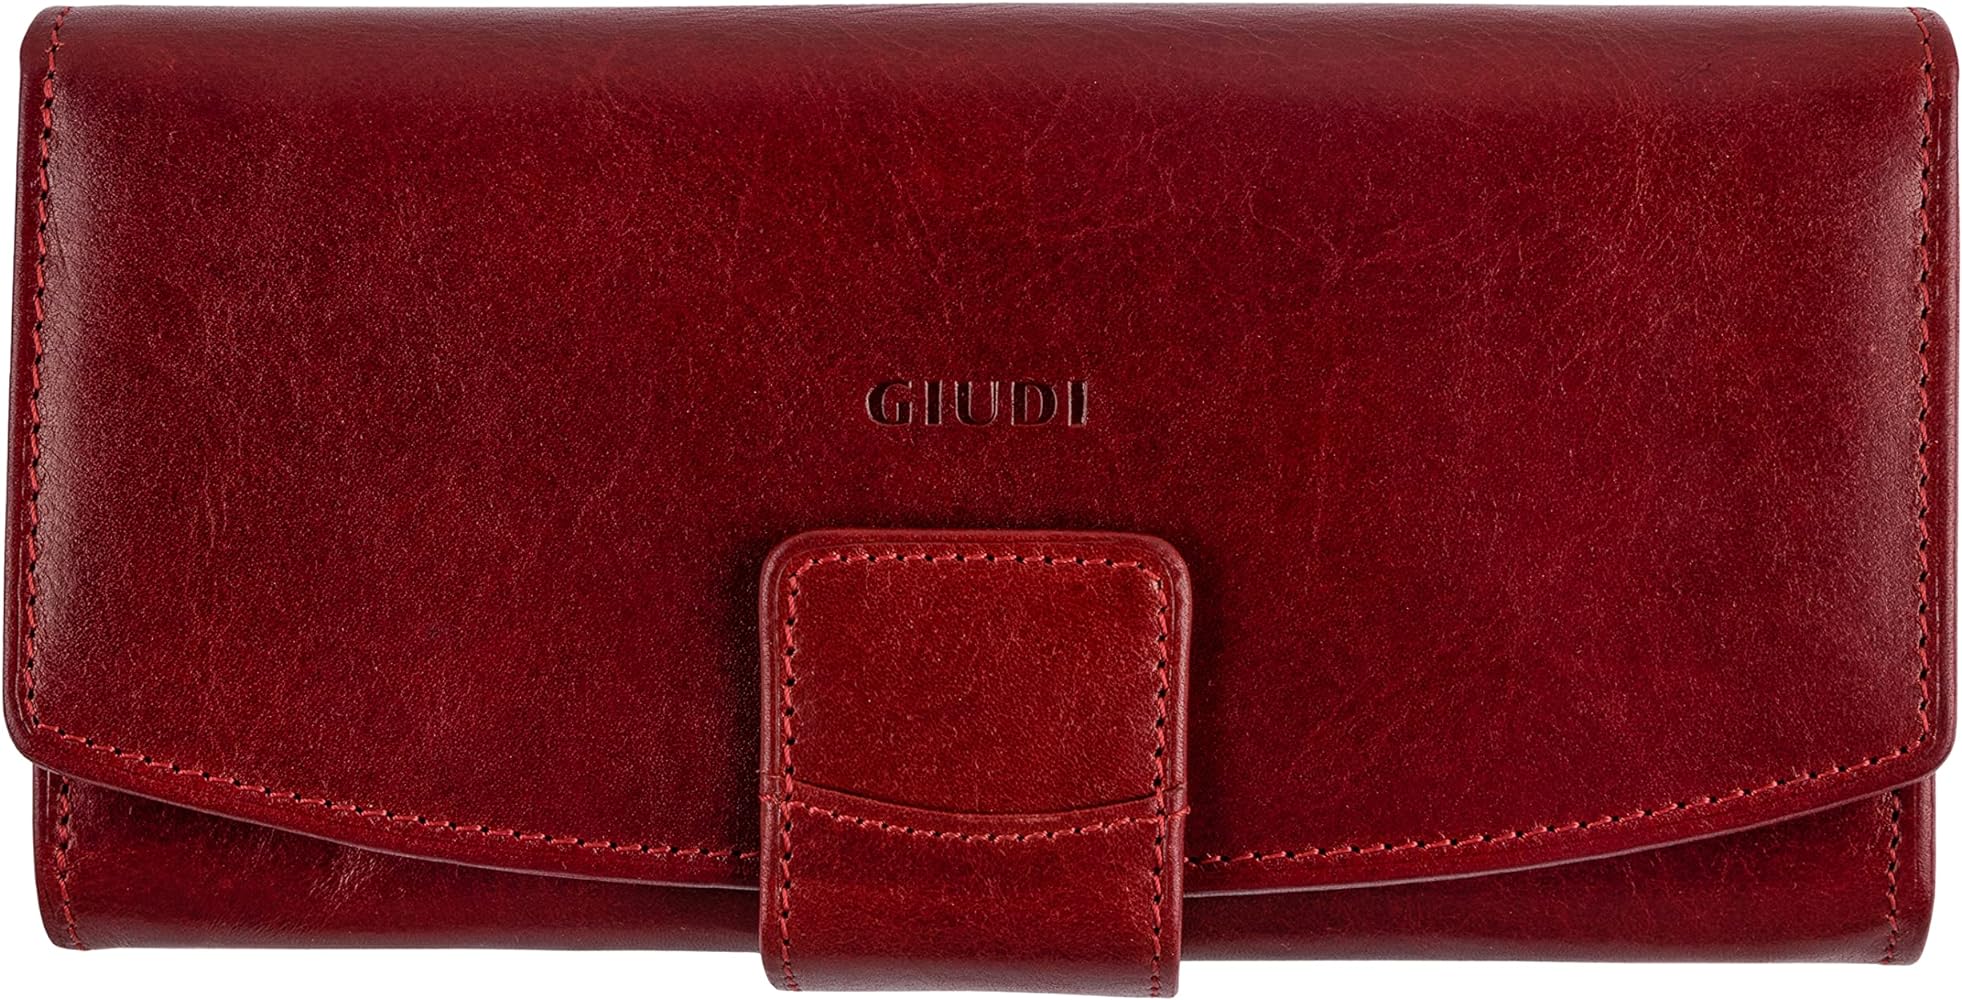 18 Best Wallets for Women That’ll Stand the Test of Time | Glamour